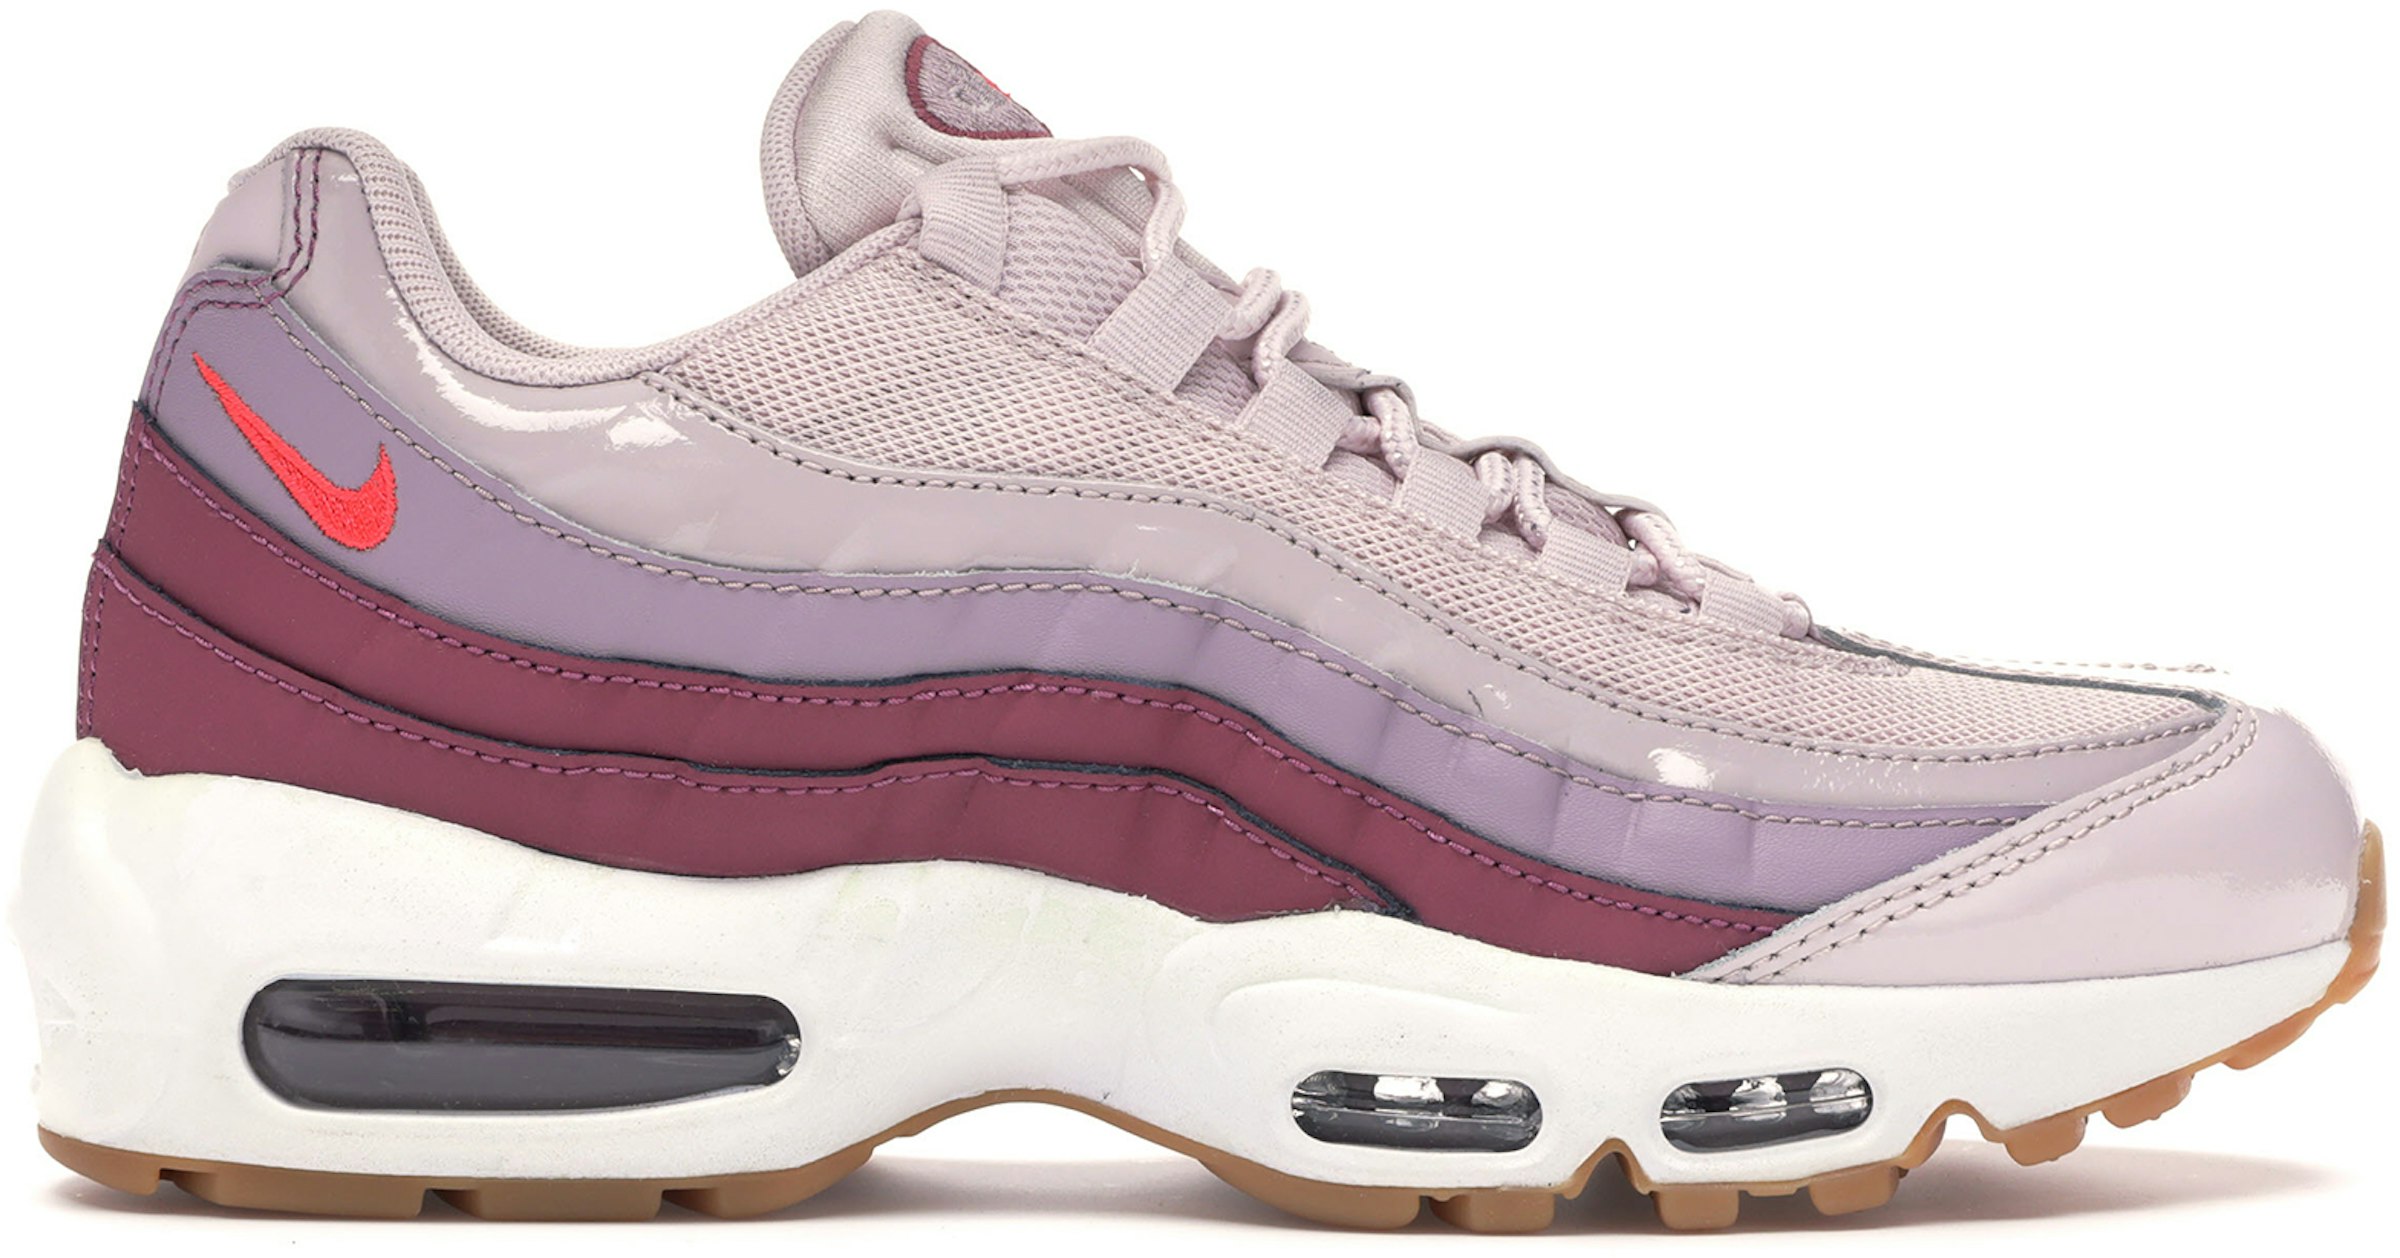 Air Max 95 Barely Rose Hot Punch (Women's) - 307960-603 - US